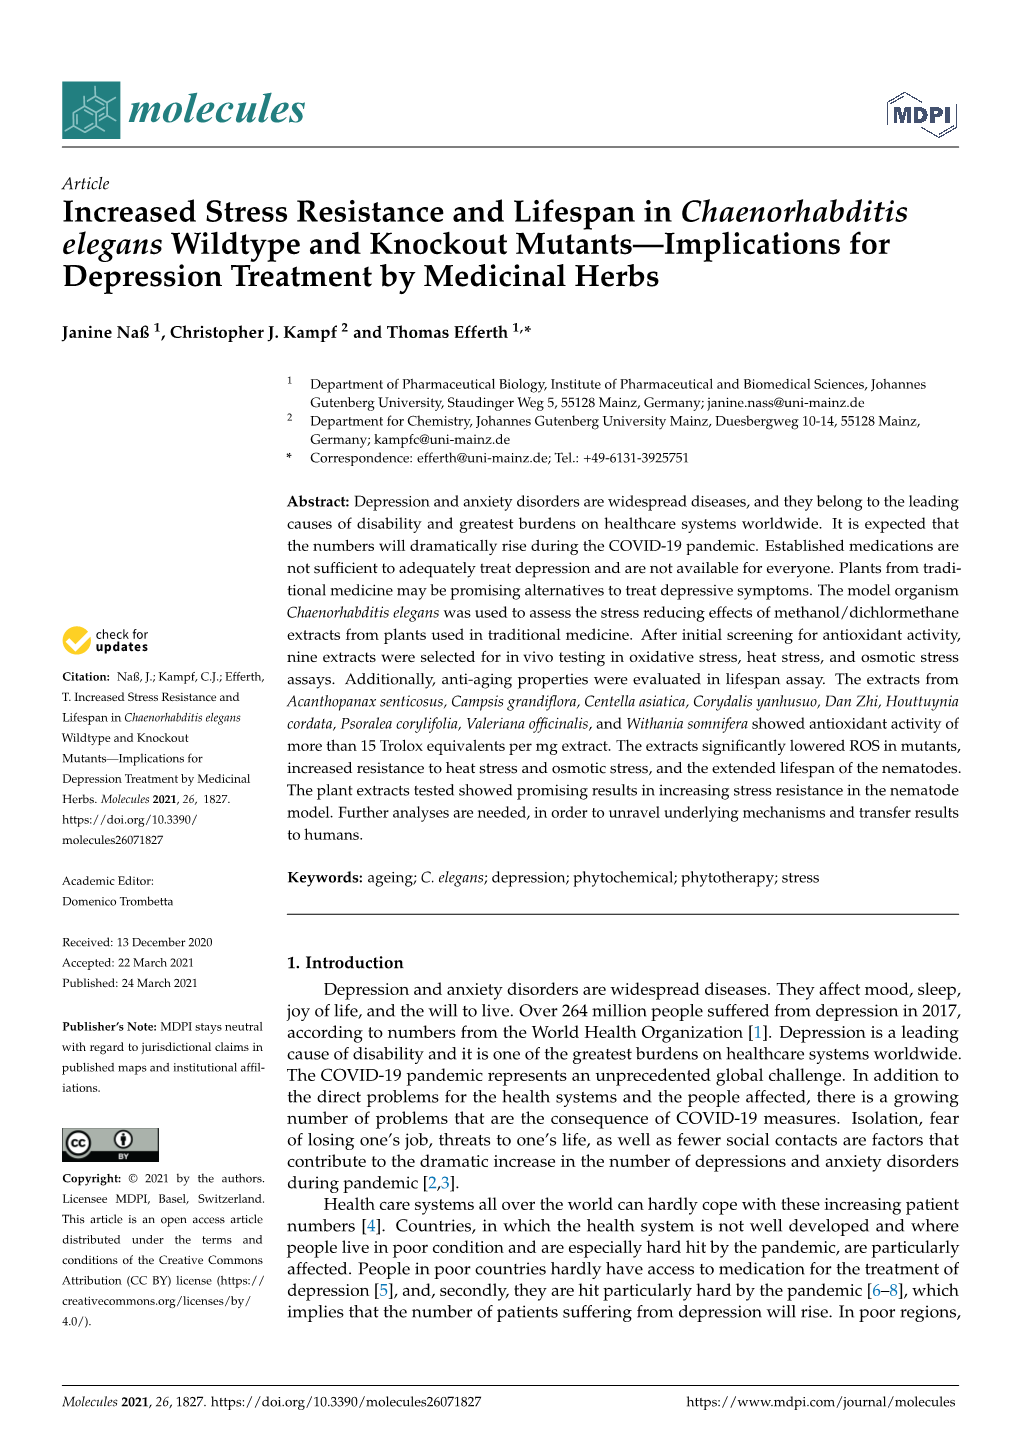 Increased Stress Resistance and Lifespan in Chaenorhabditis Elegans Wildtype and Knockout Mutants—Implications for Depression Treatment by Medicinal Herbs